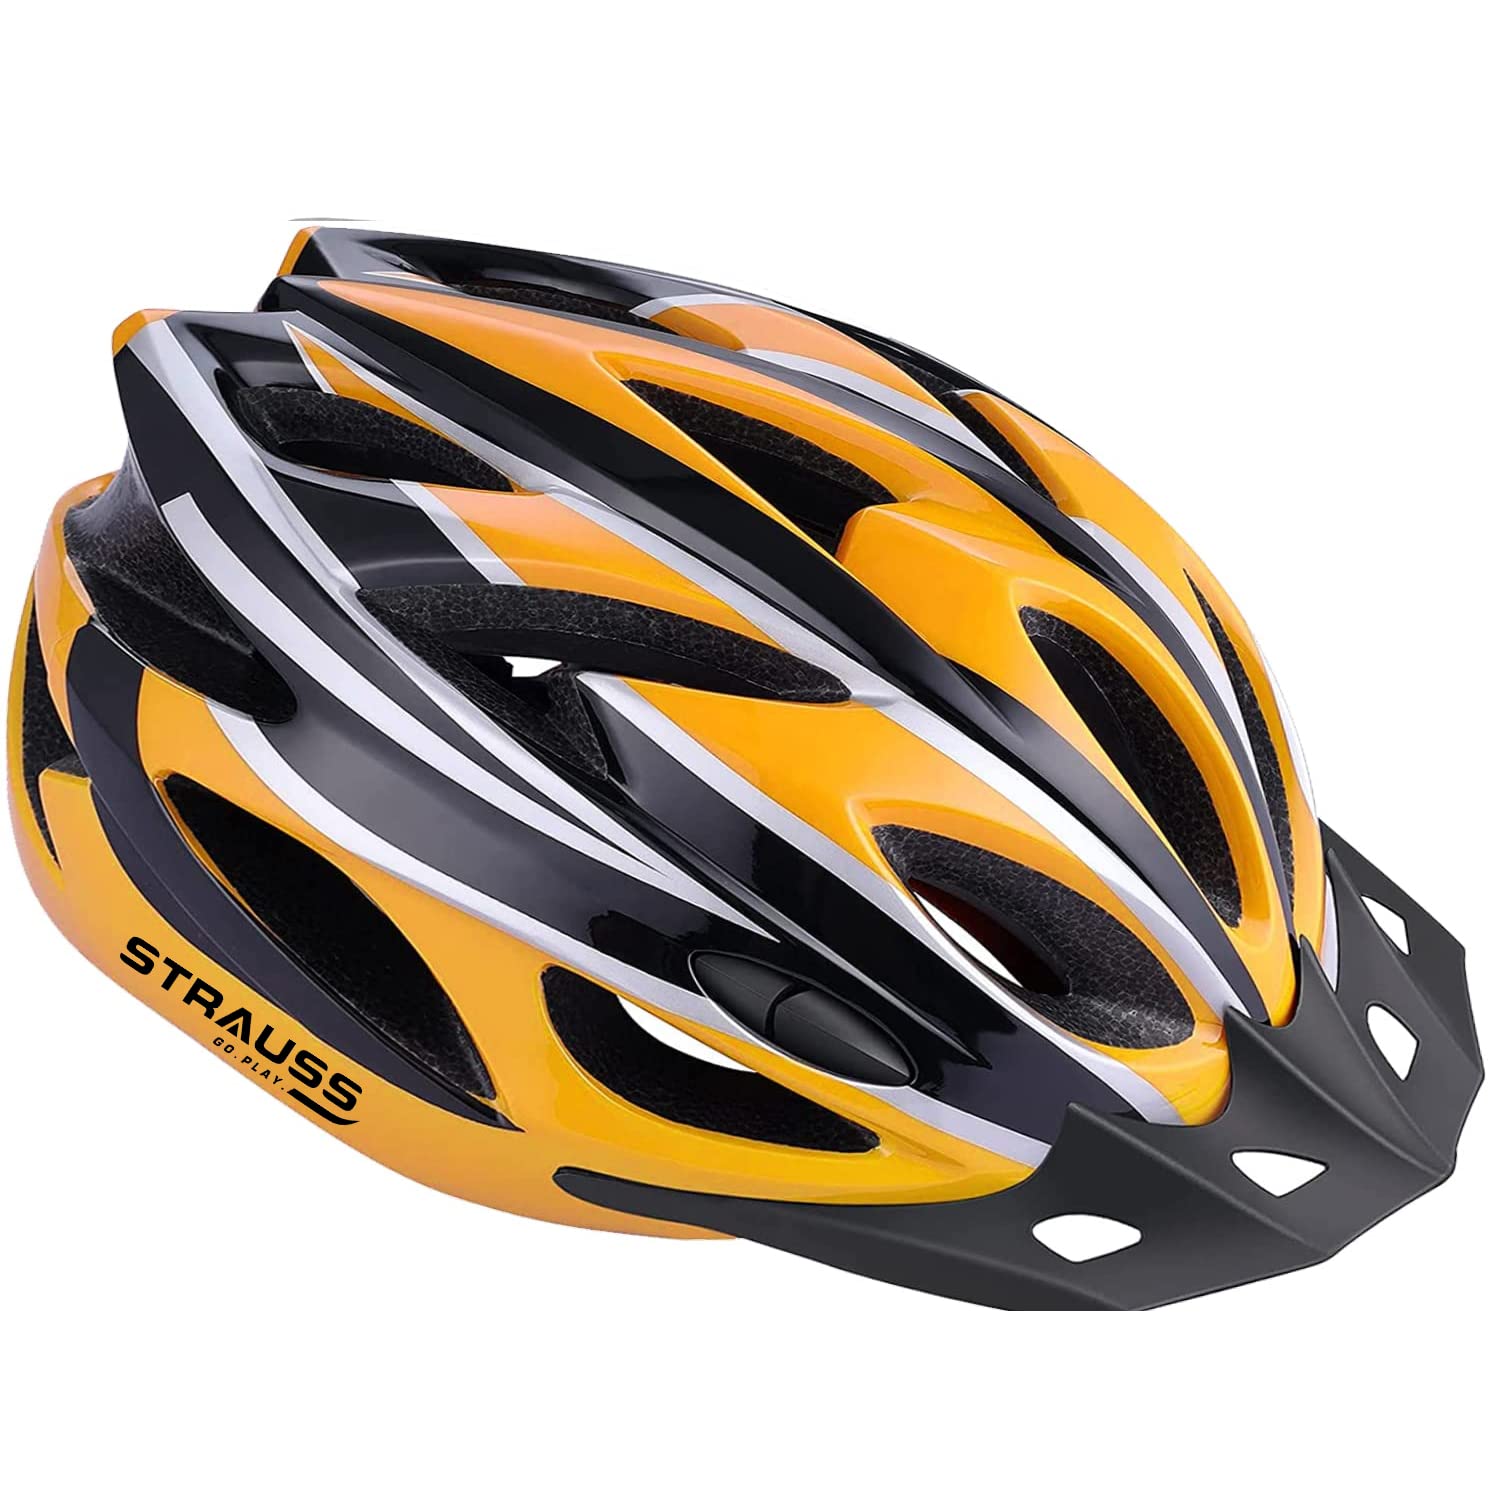 Strauss Adjustable Cycling Helmet with Detachable Visor | Light Weight with Superior Ventilation | Mountain, Road Bike & Skating Helmet With Premium EPS Foam Lining & ABS Shell | Ideal for Adults and Kids, (Black/Yellow))